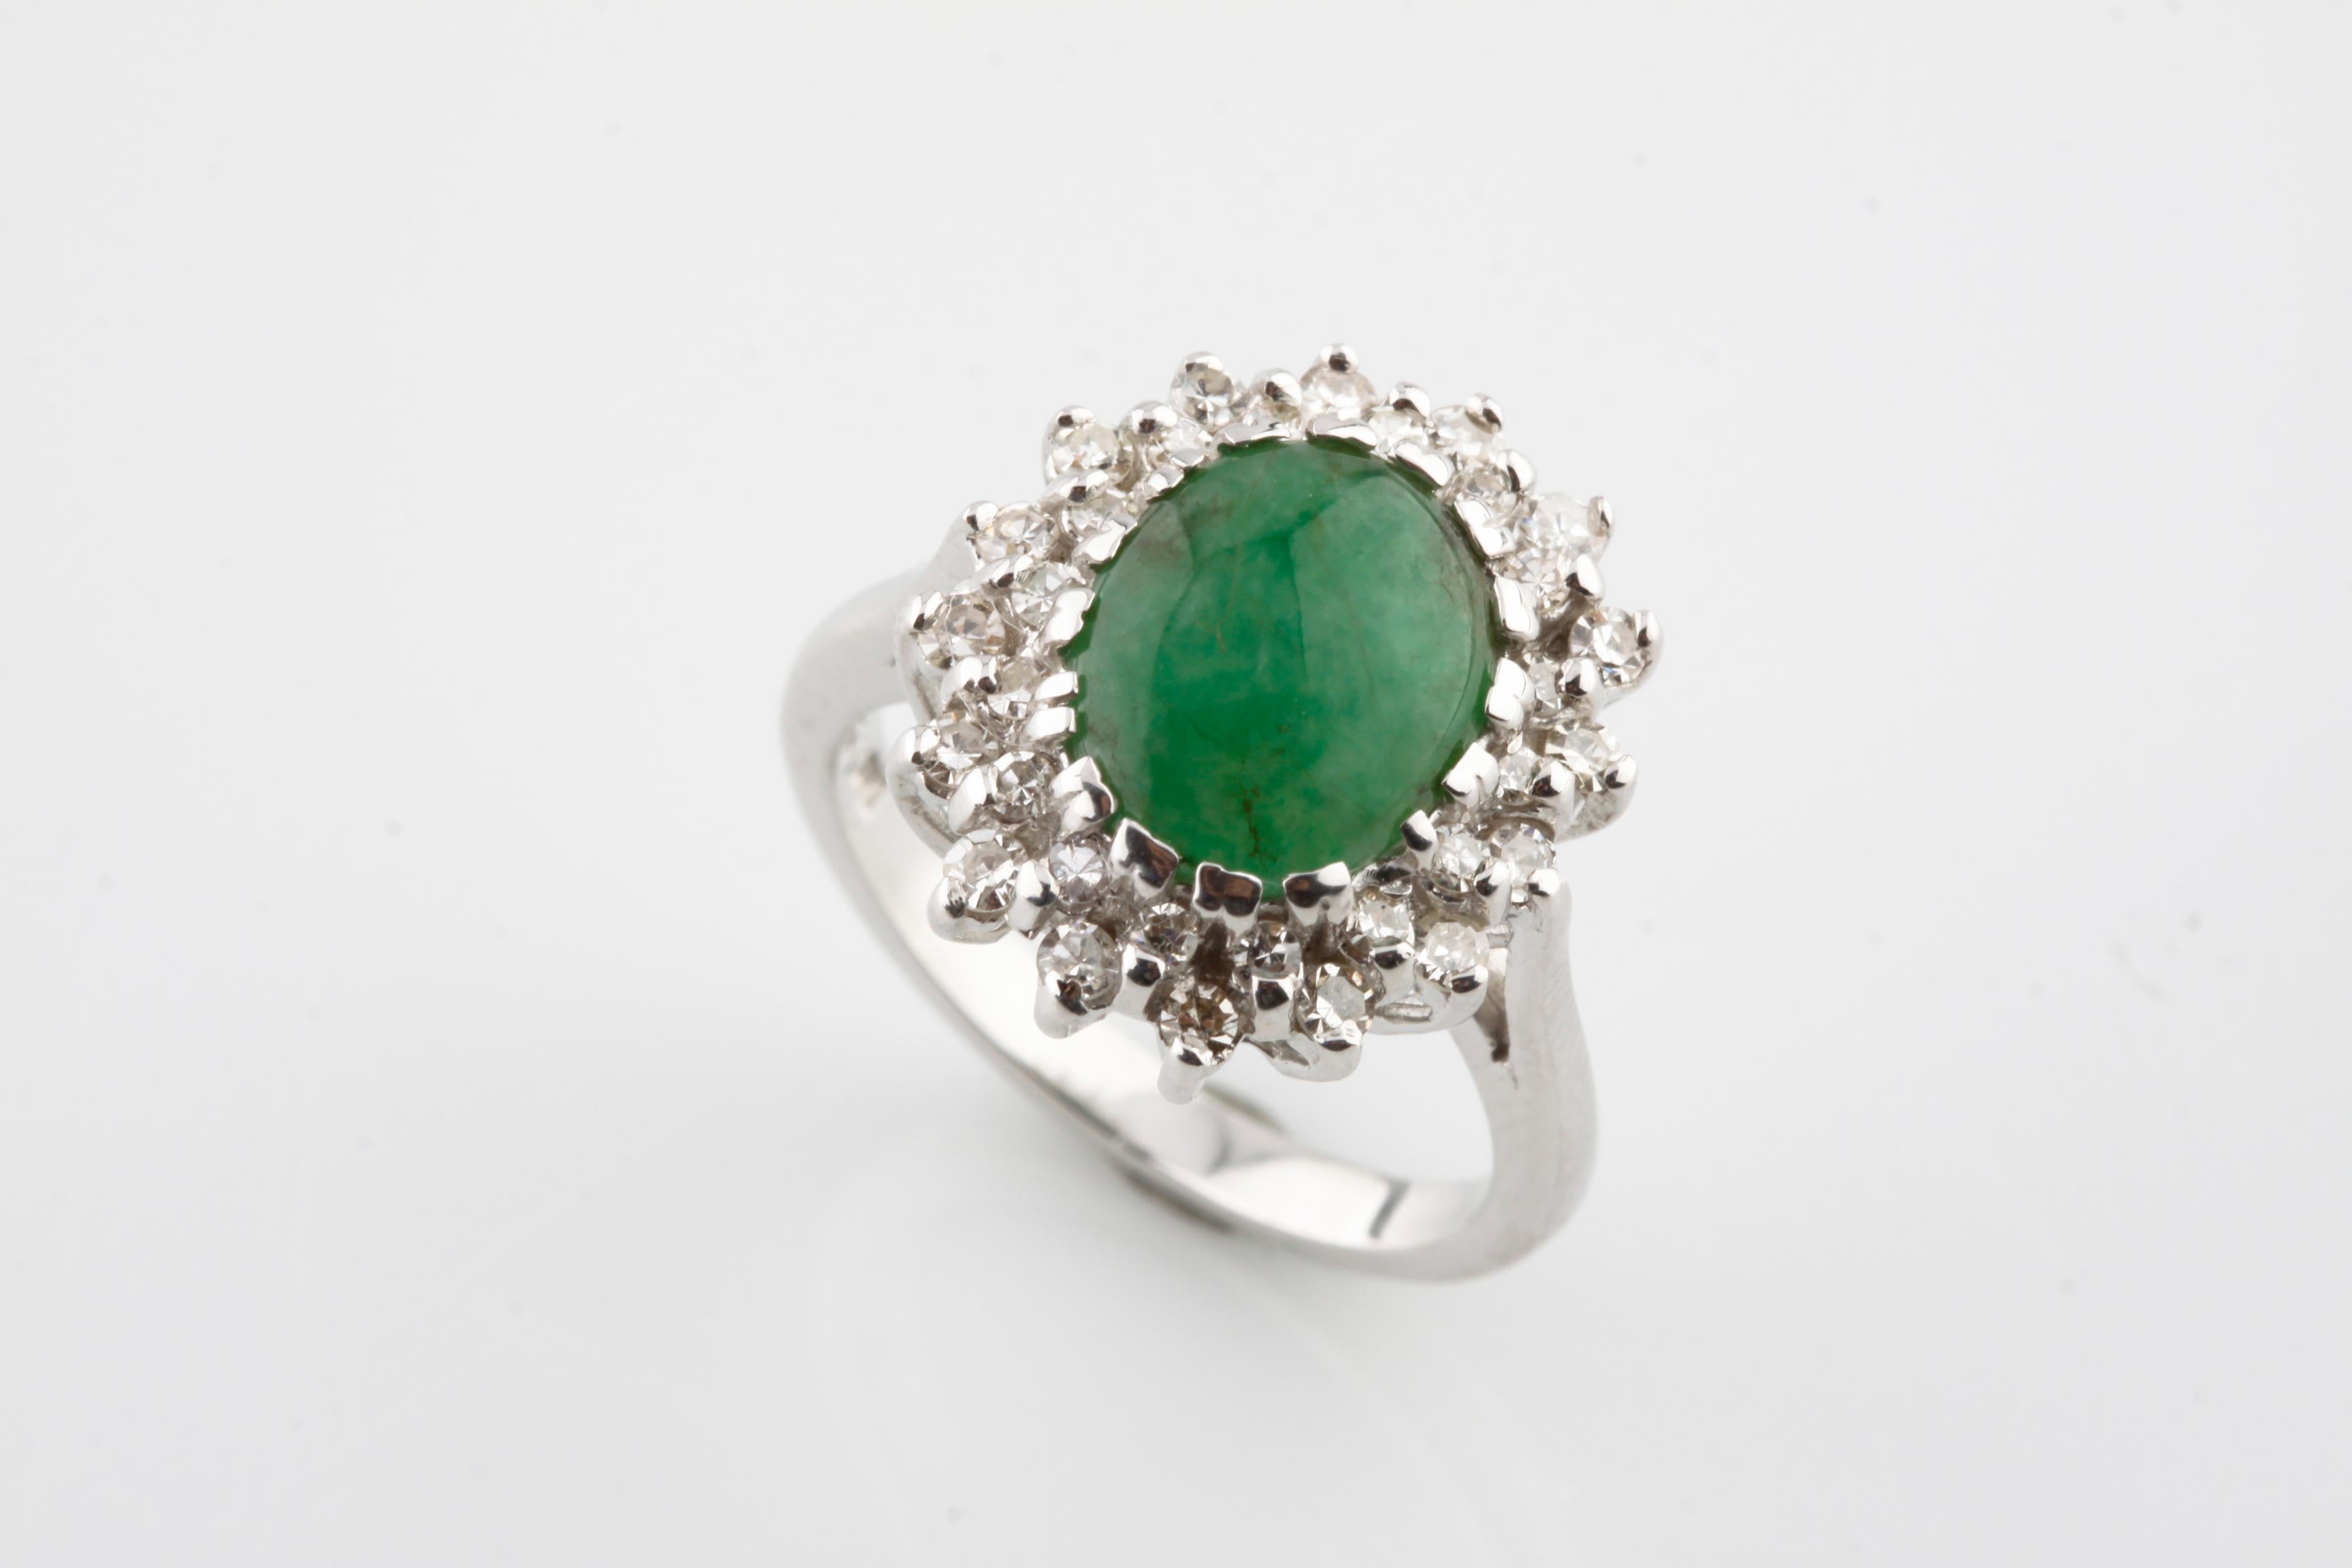 One Electronically tested 14k white gold ladies cast jadeite & diamond ring with a bright finish. Condition is new, good workmanship. Trademark is GM. Identified with markings of 